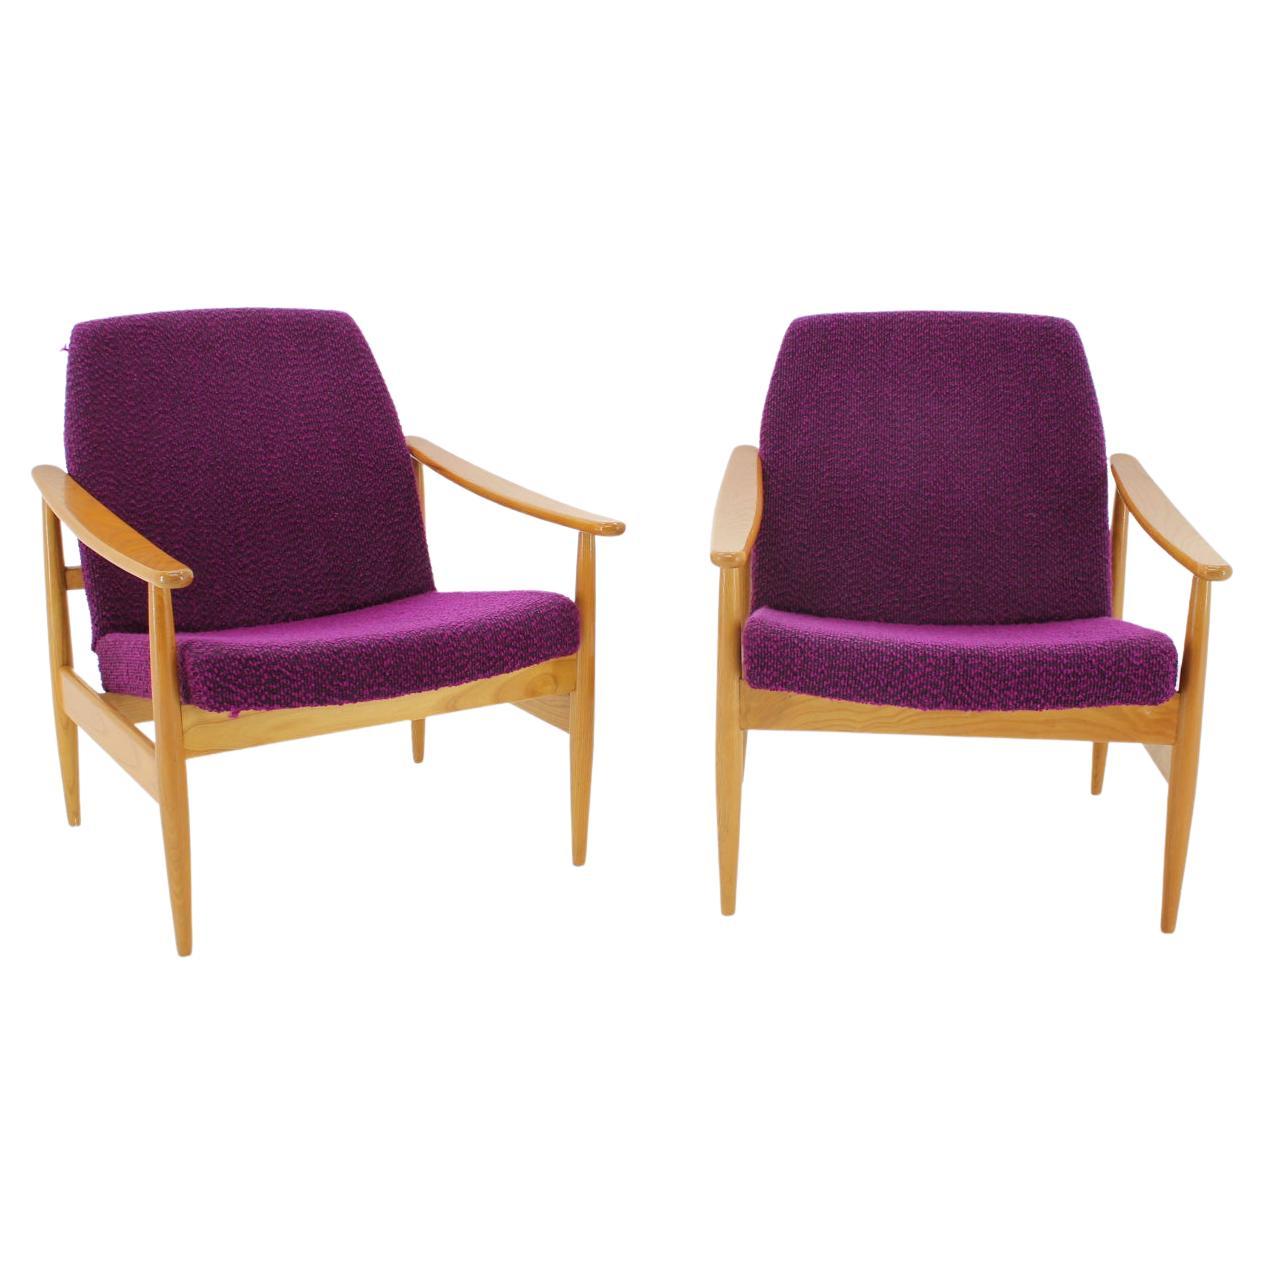 1960s Set of Two Armchairs, Czechoslovakia For Sale